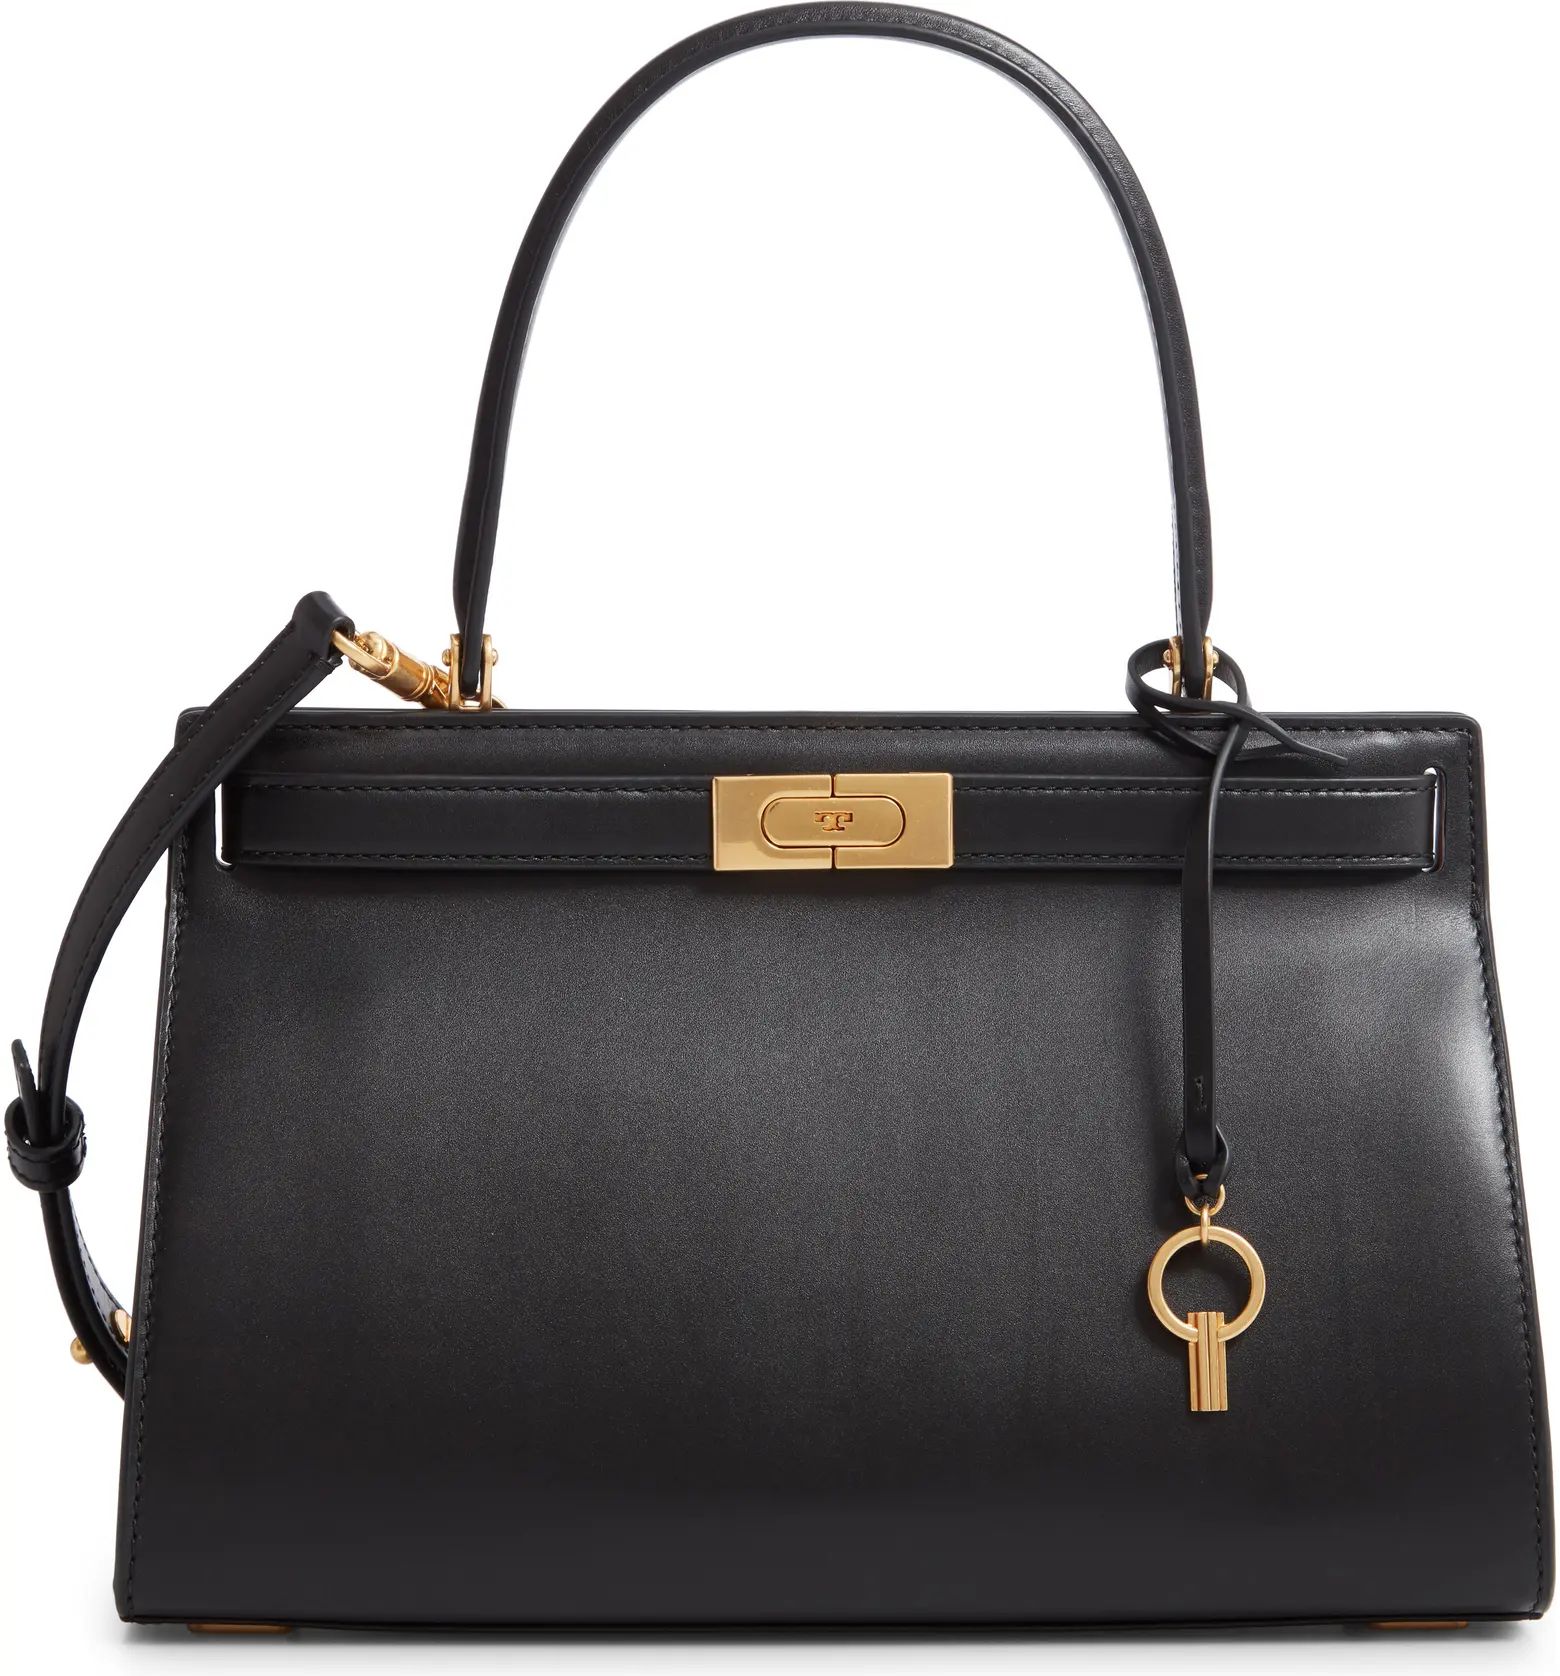 Tory Burch Small Lee Radziwill Leather Bag | Nordstrom | Nordstrom